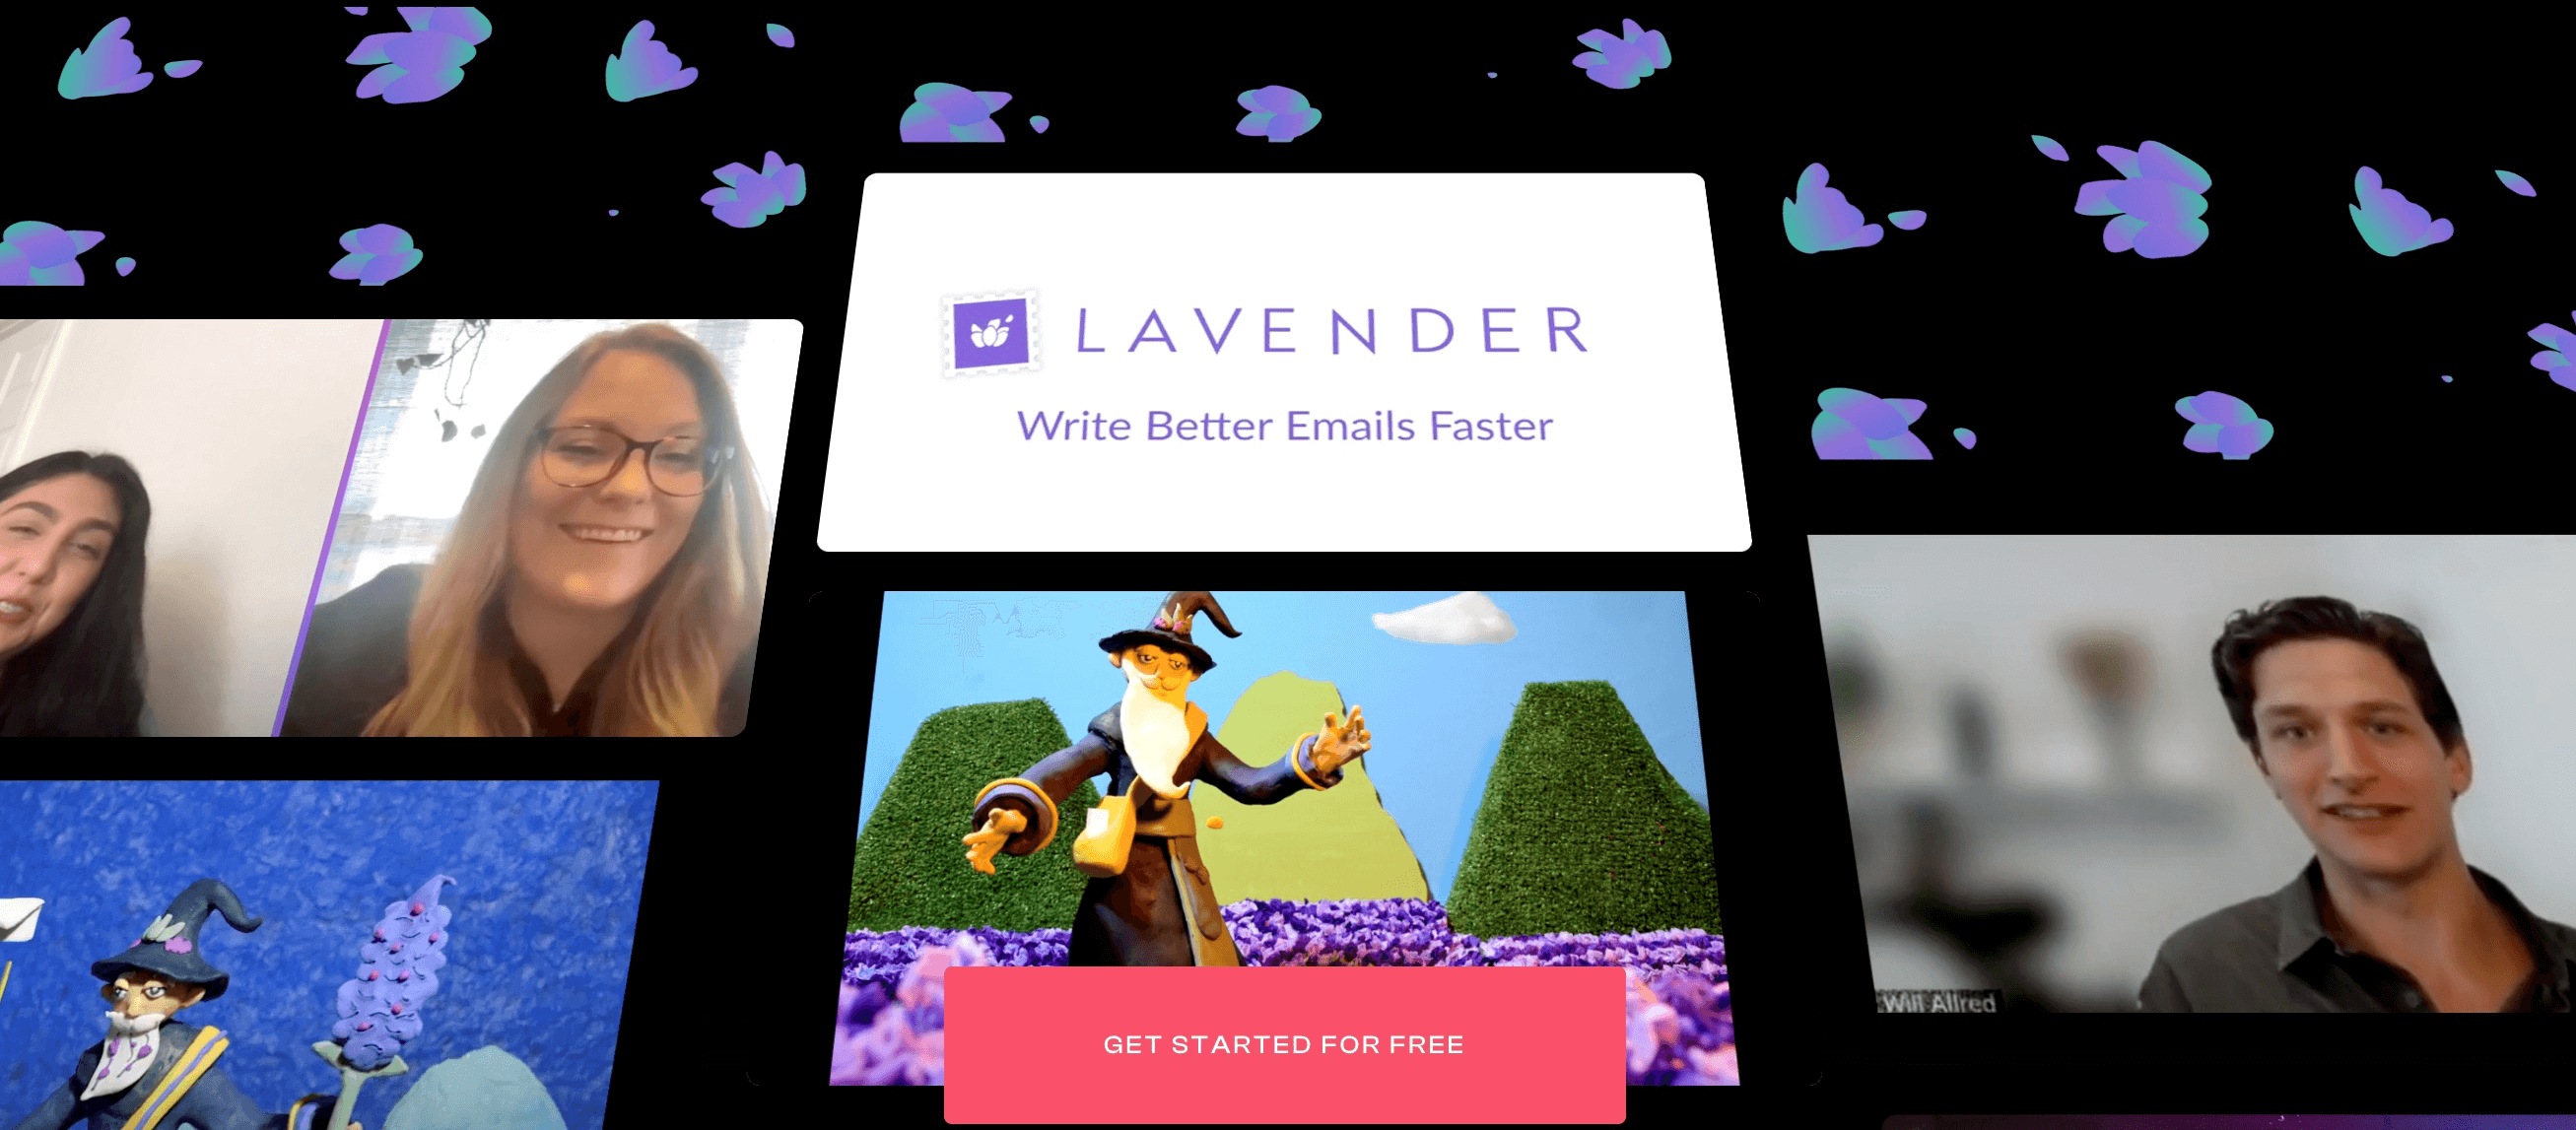 Lavender's website showcases short GIFs demonstrating interactive emails created with their tool and offers glimpses of coaching sessions with experts.